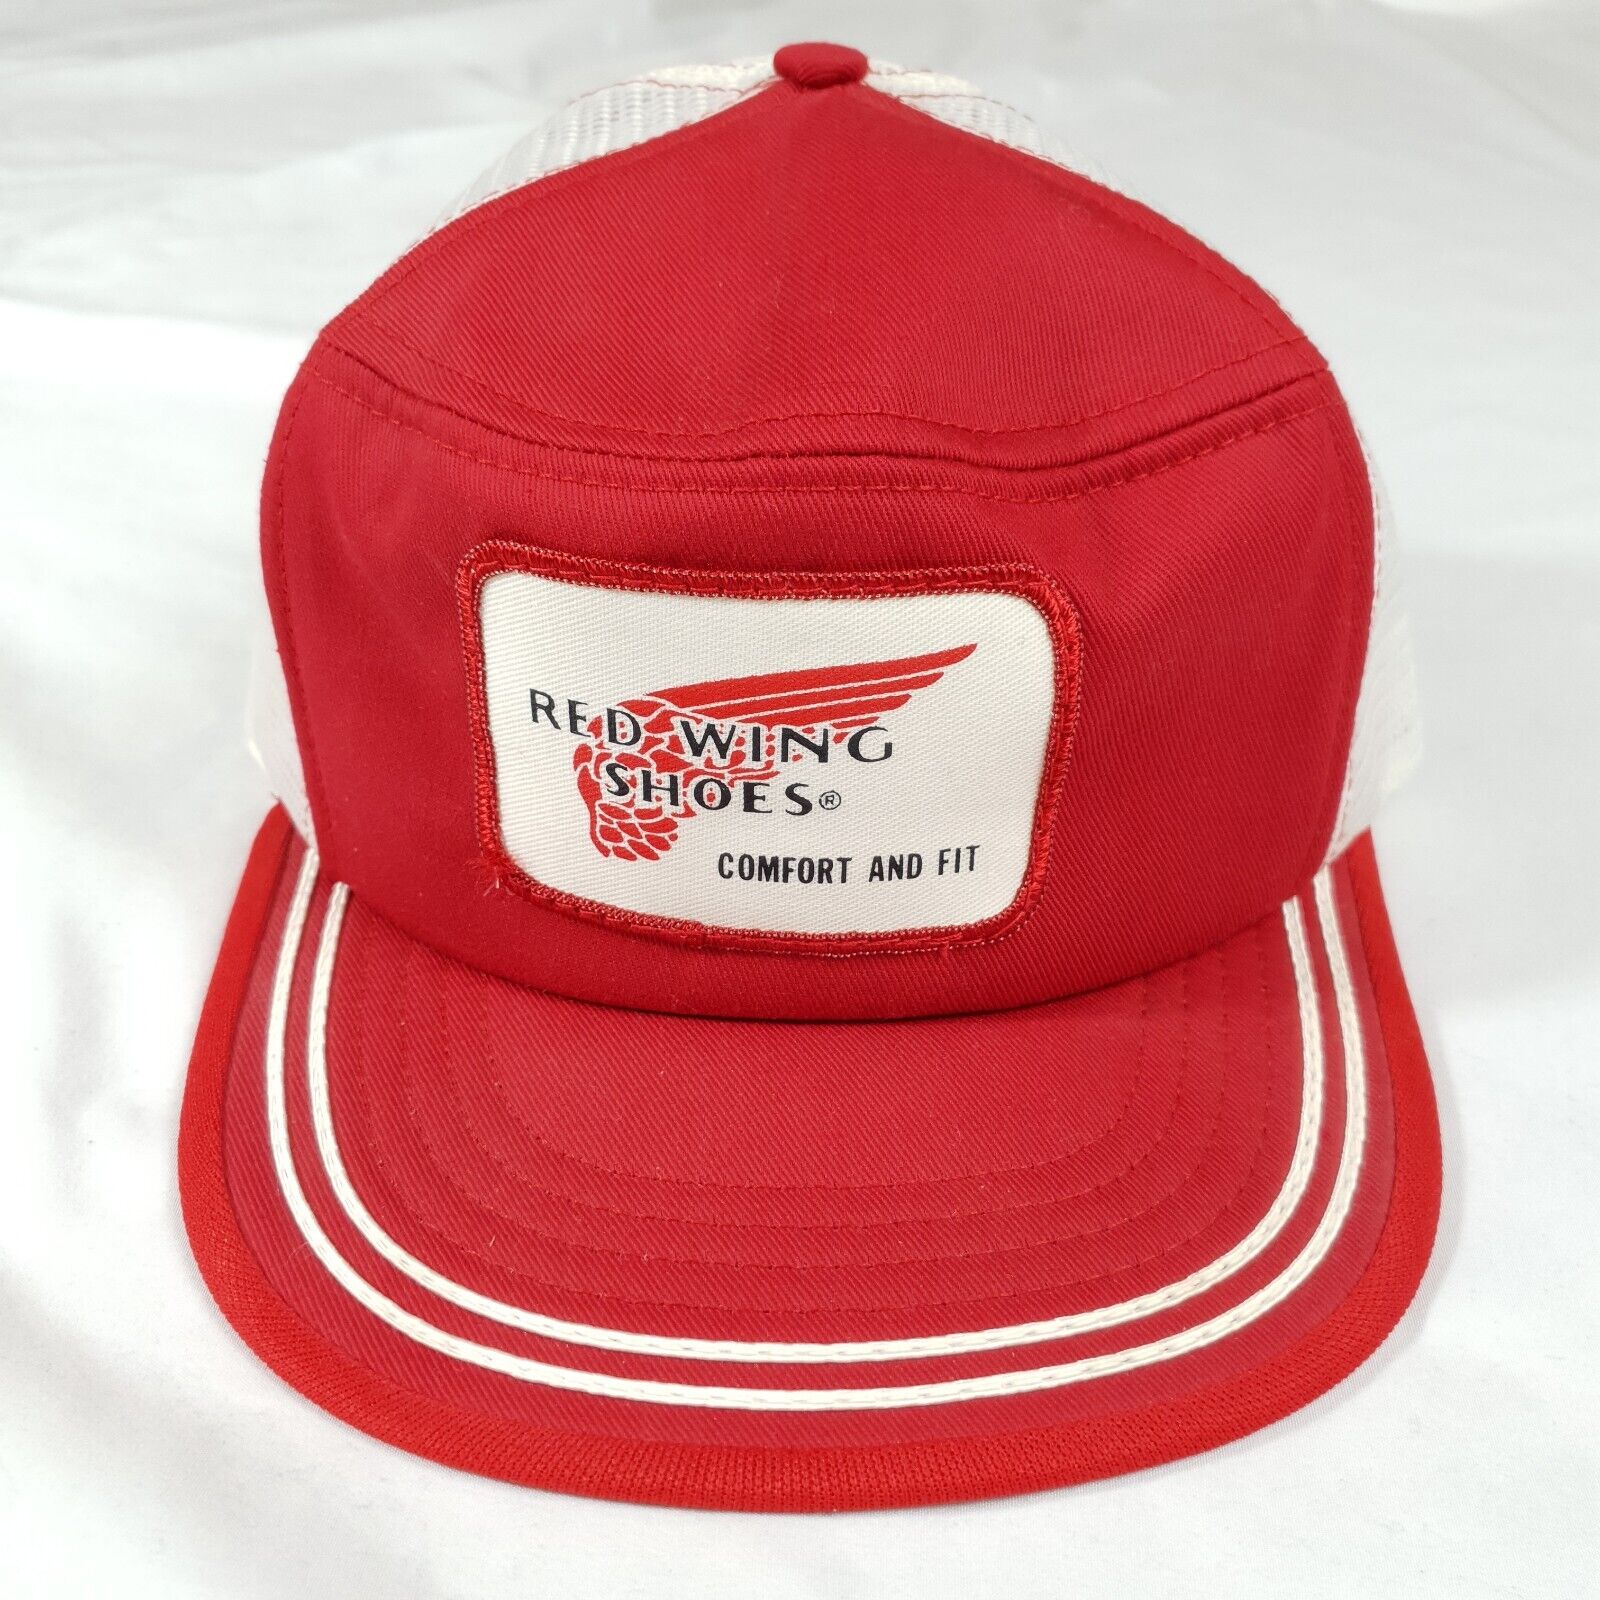 Vintage 80s Red Wing Shoes Patch Mesh Snapback Trucker Hat